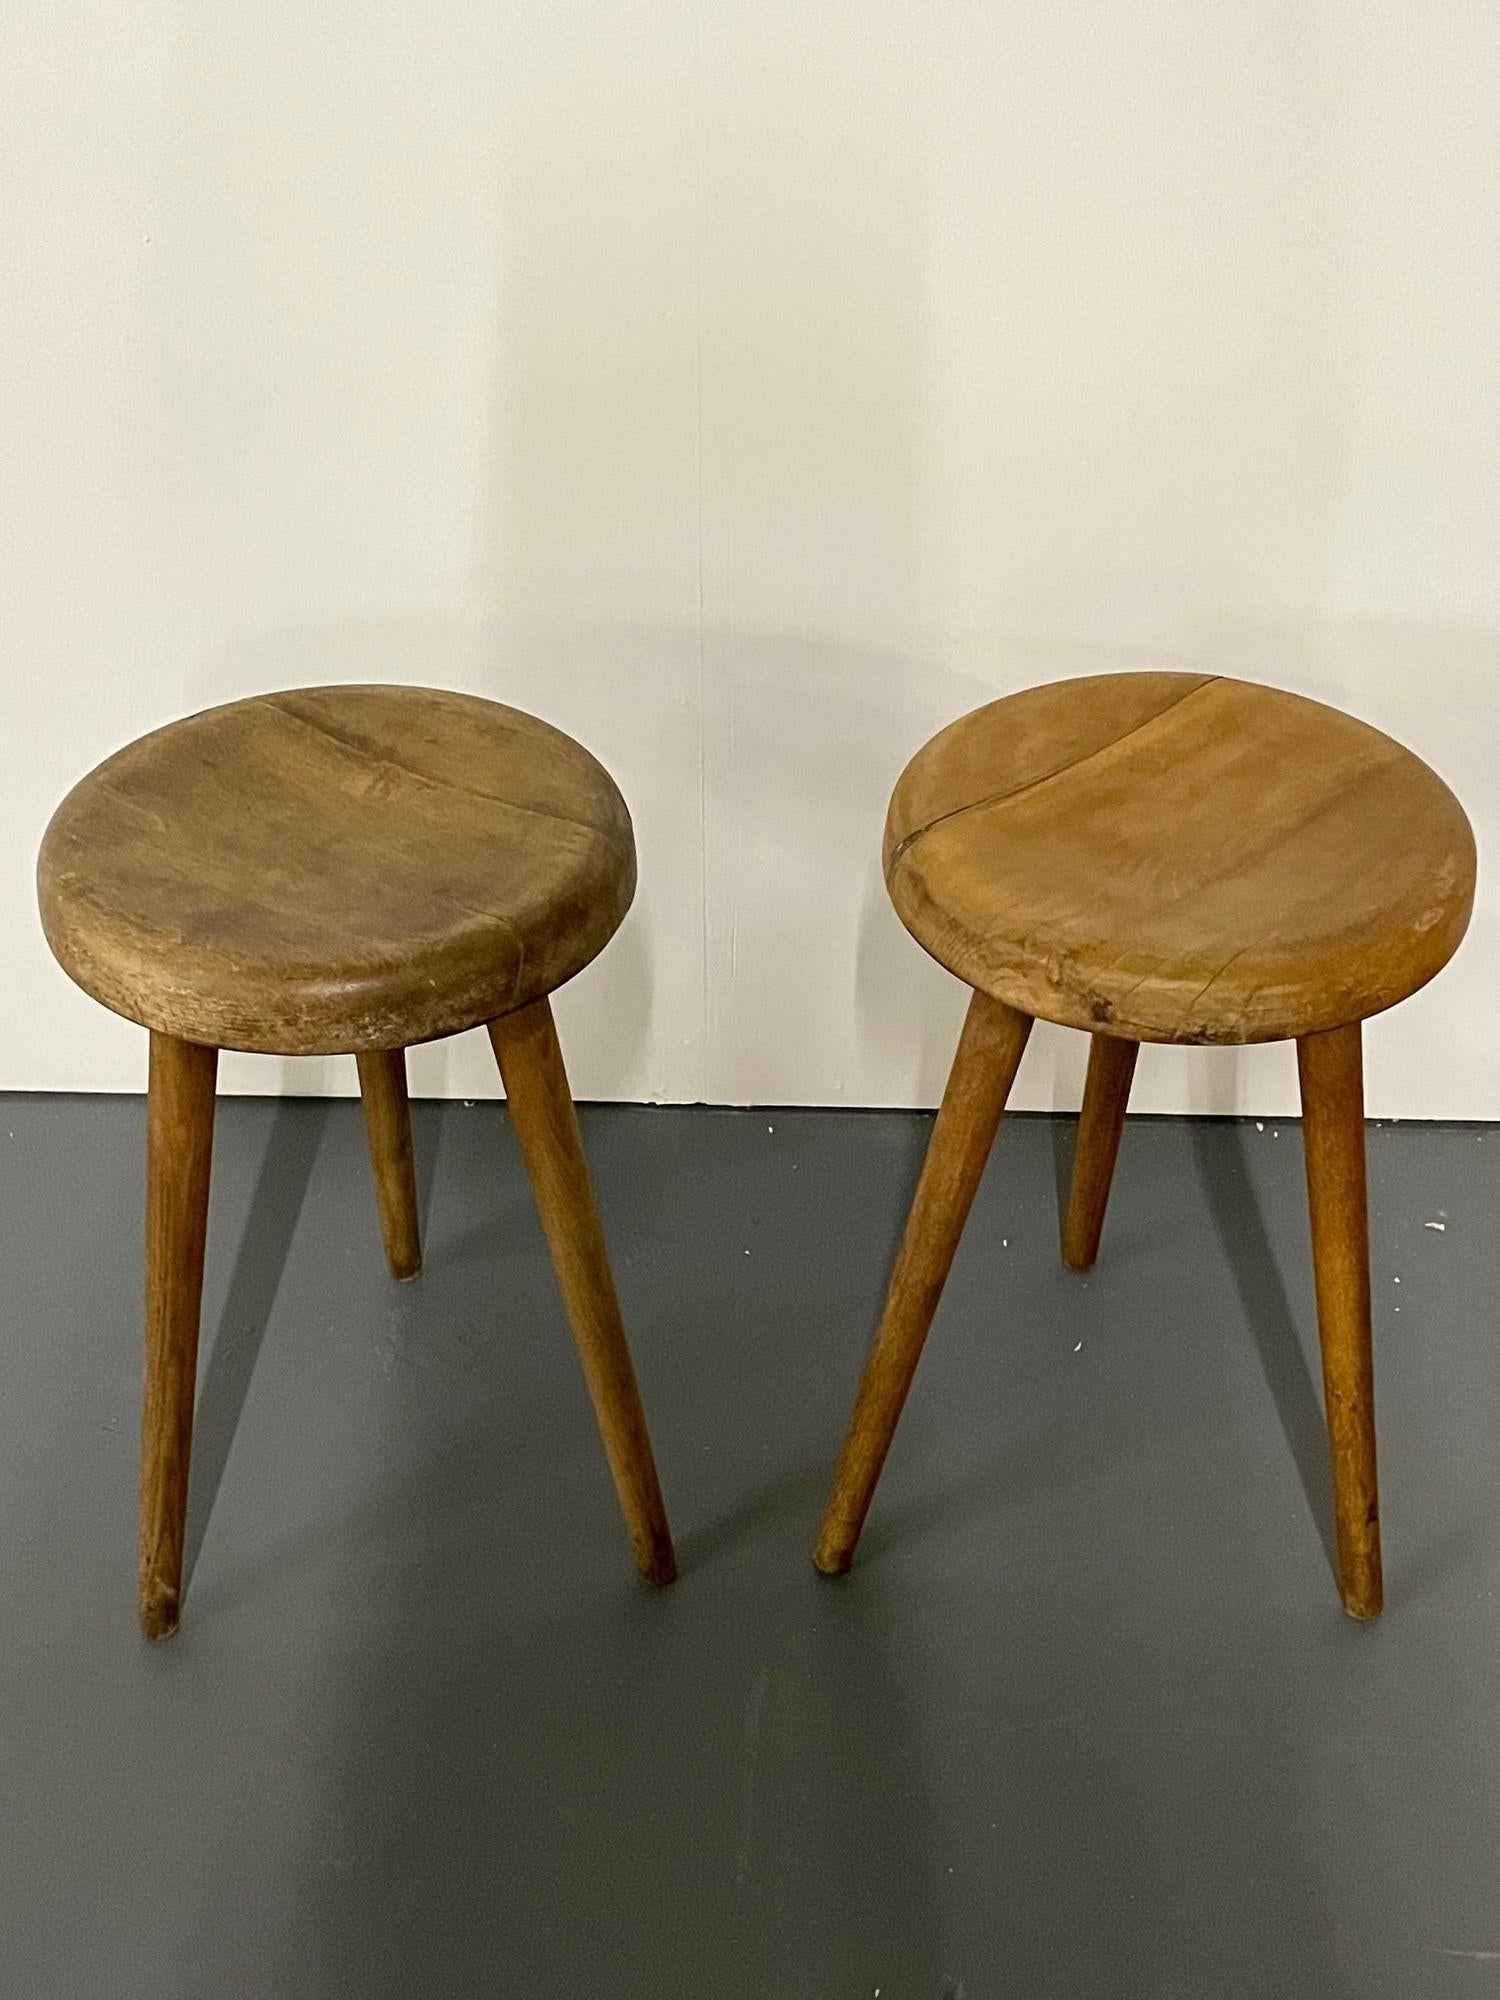 20th Century Mid-Century Modern Wooden French Provincial Stools, Charlotte Perriand Style